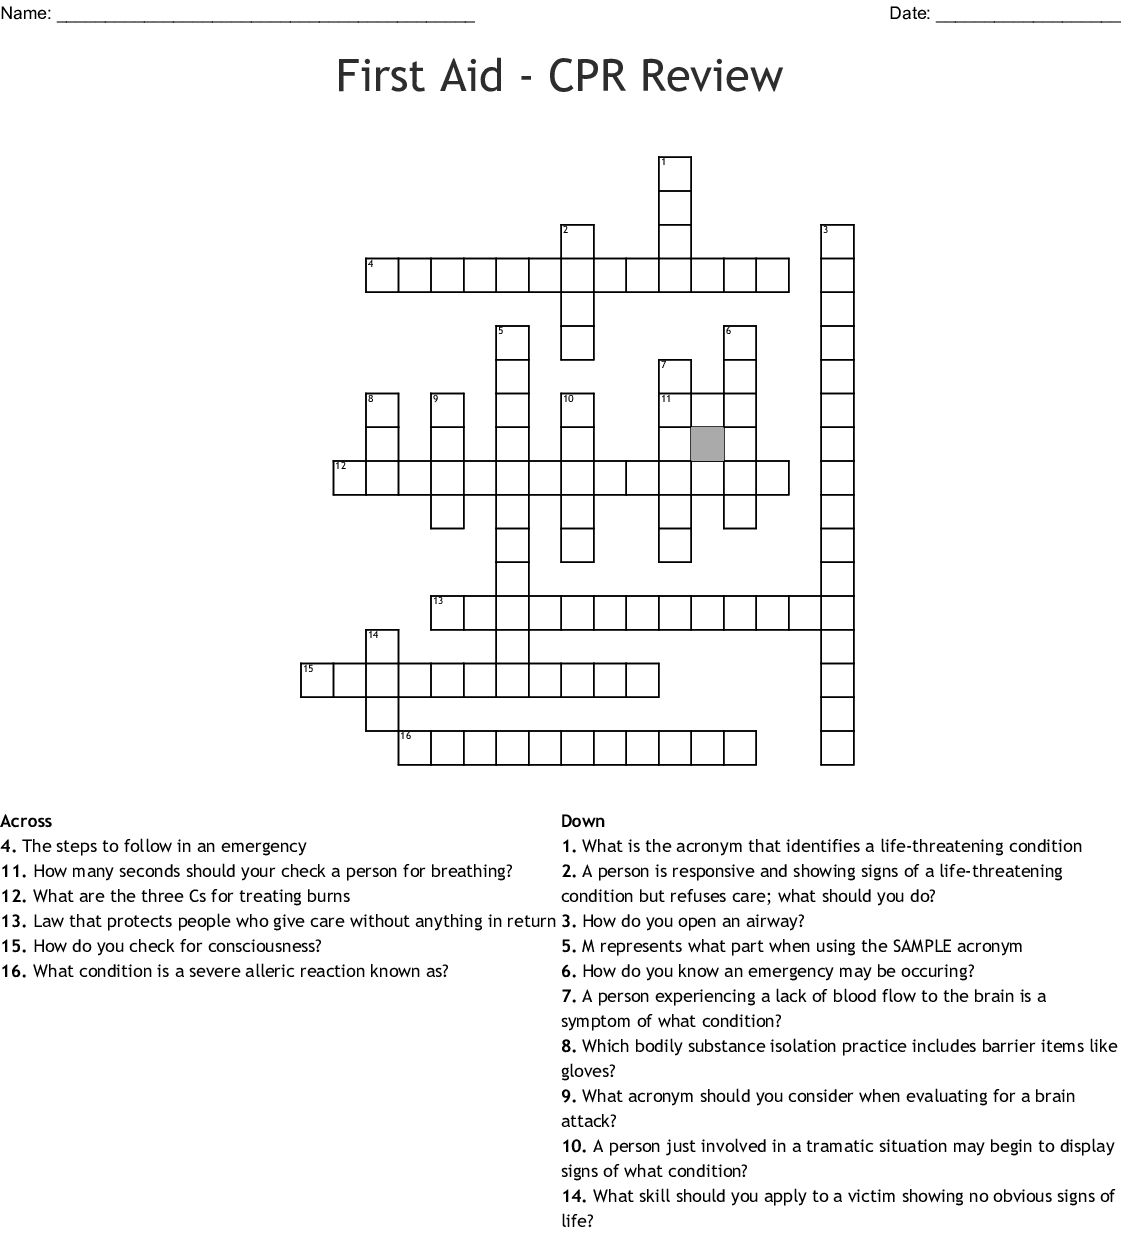 First Aid - Cpr Review Crossword - Wordmint - Printable Crossword Puzzle First Aid